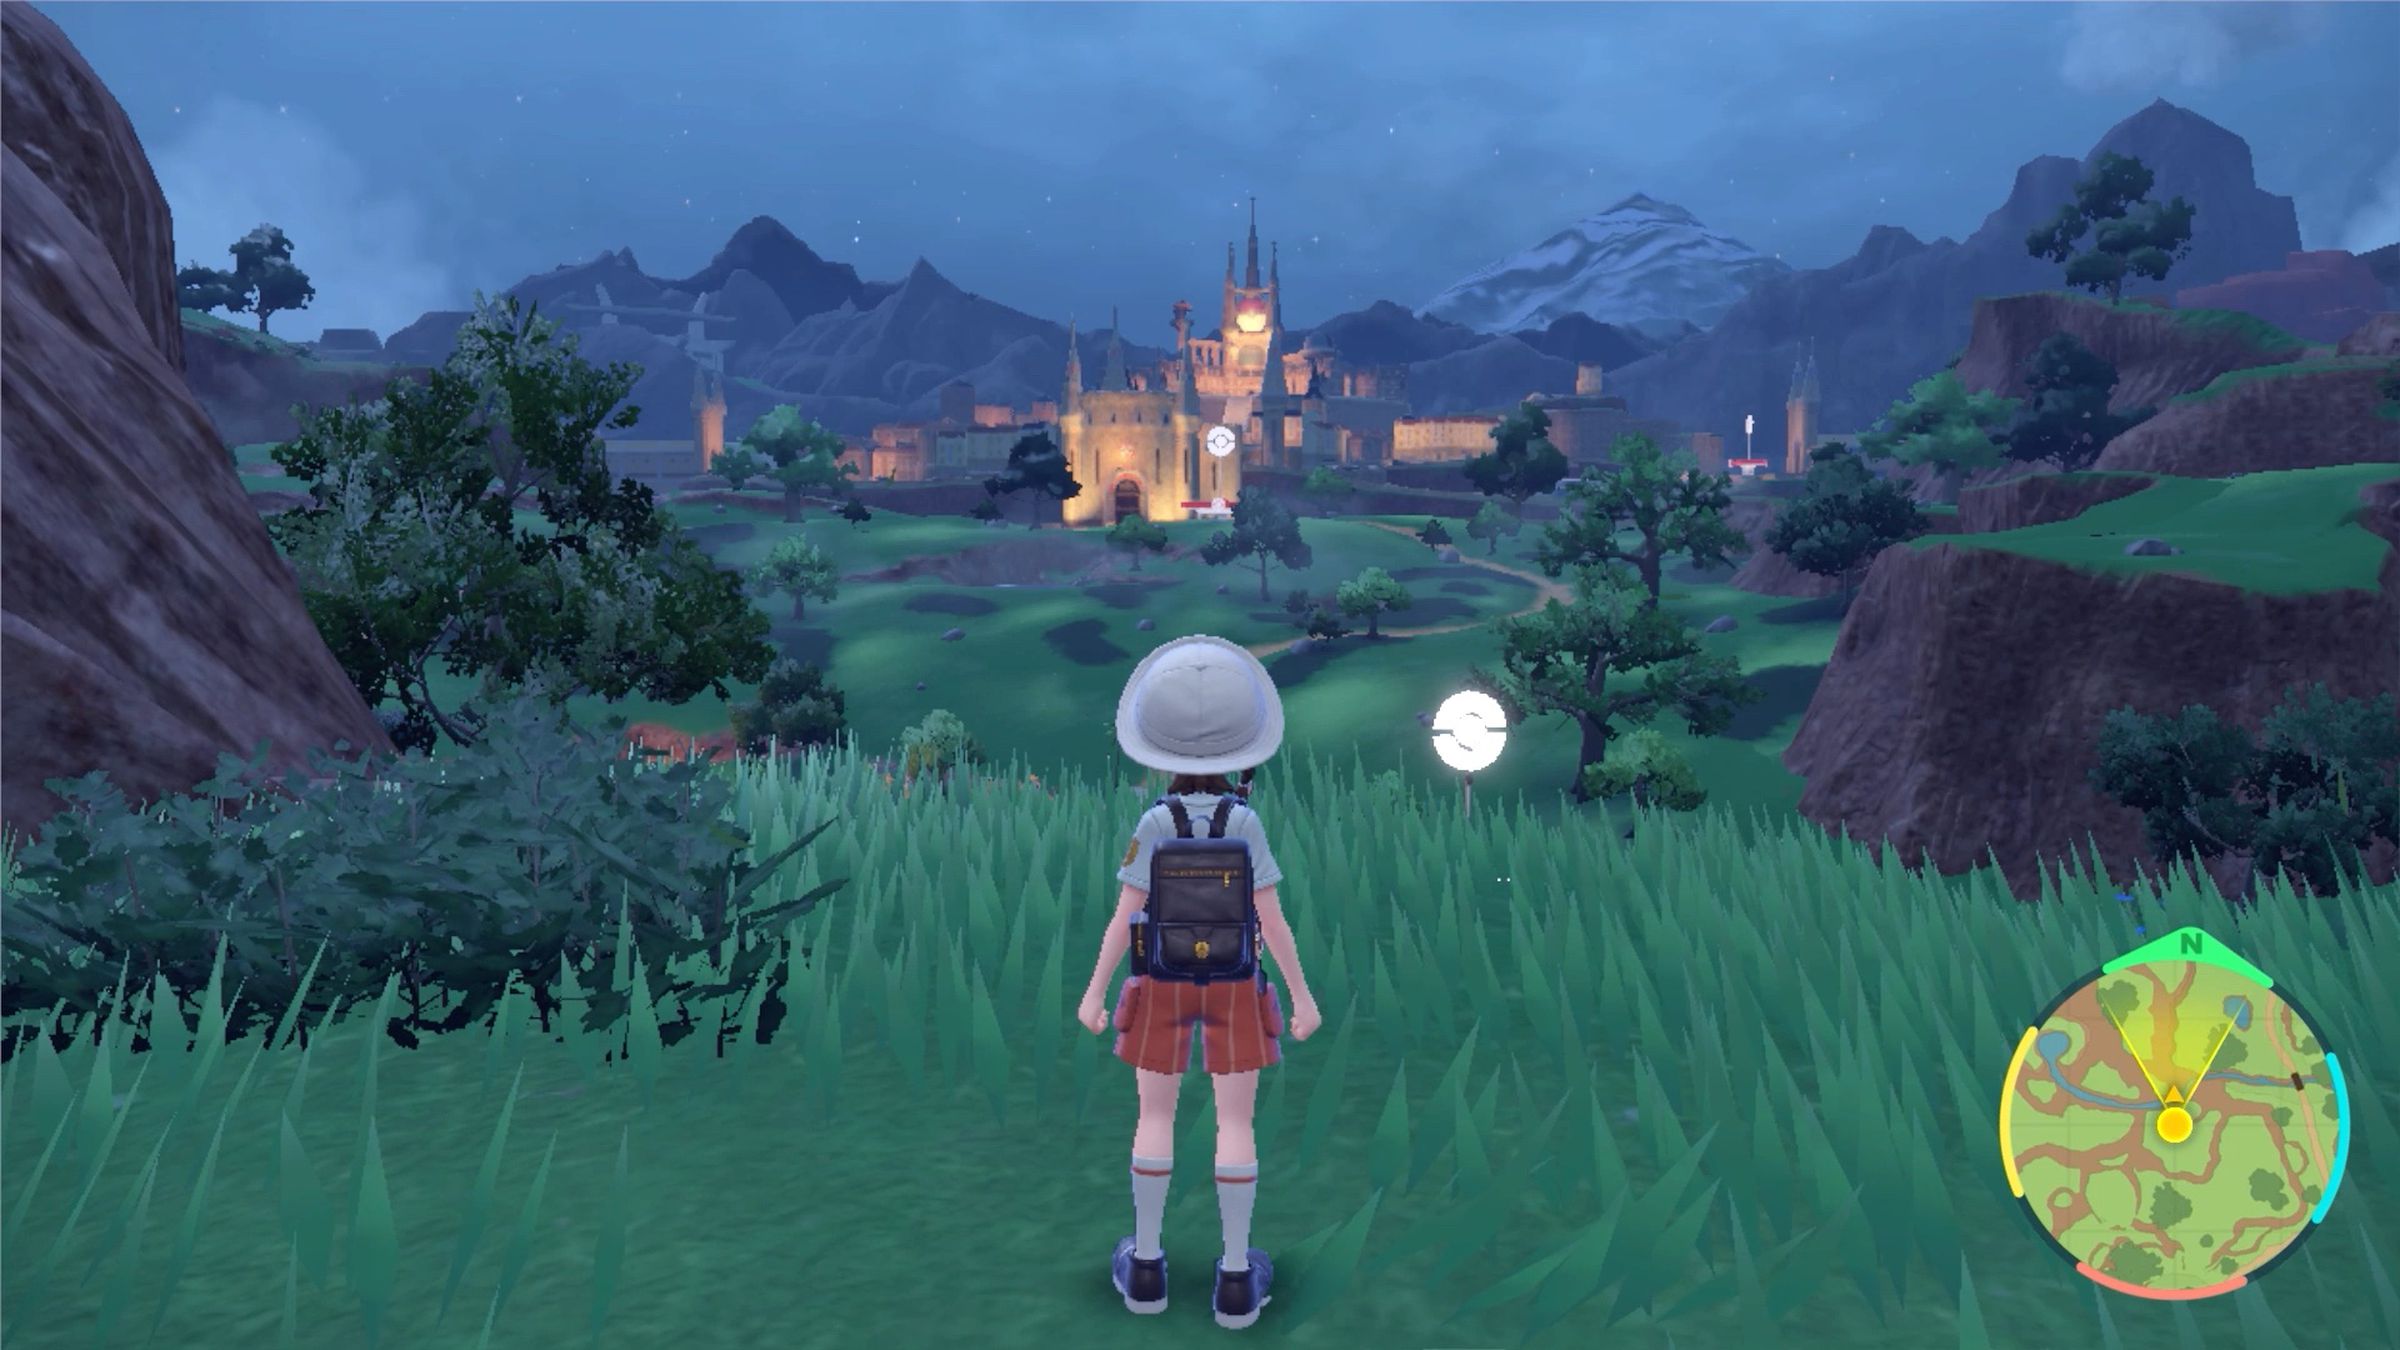 A pokémon trainer looking out over a scenic vista where a castle’s viewable in the distance.